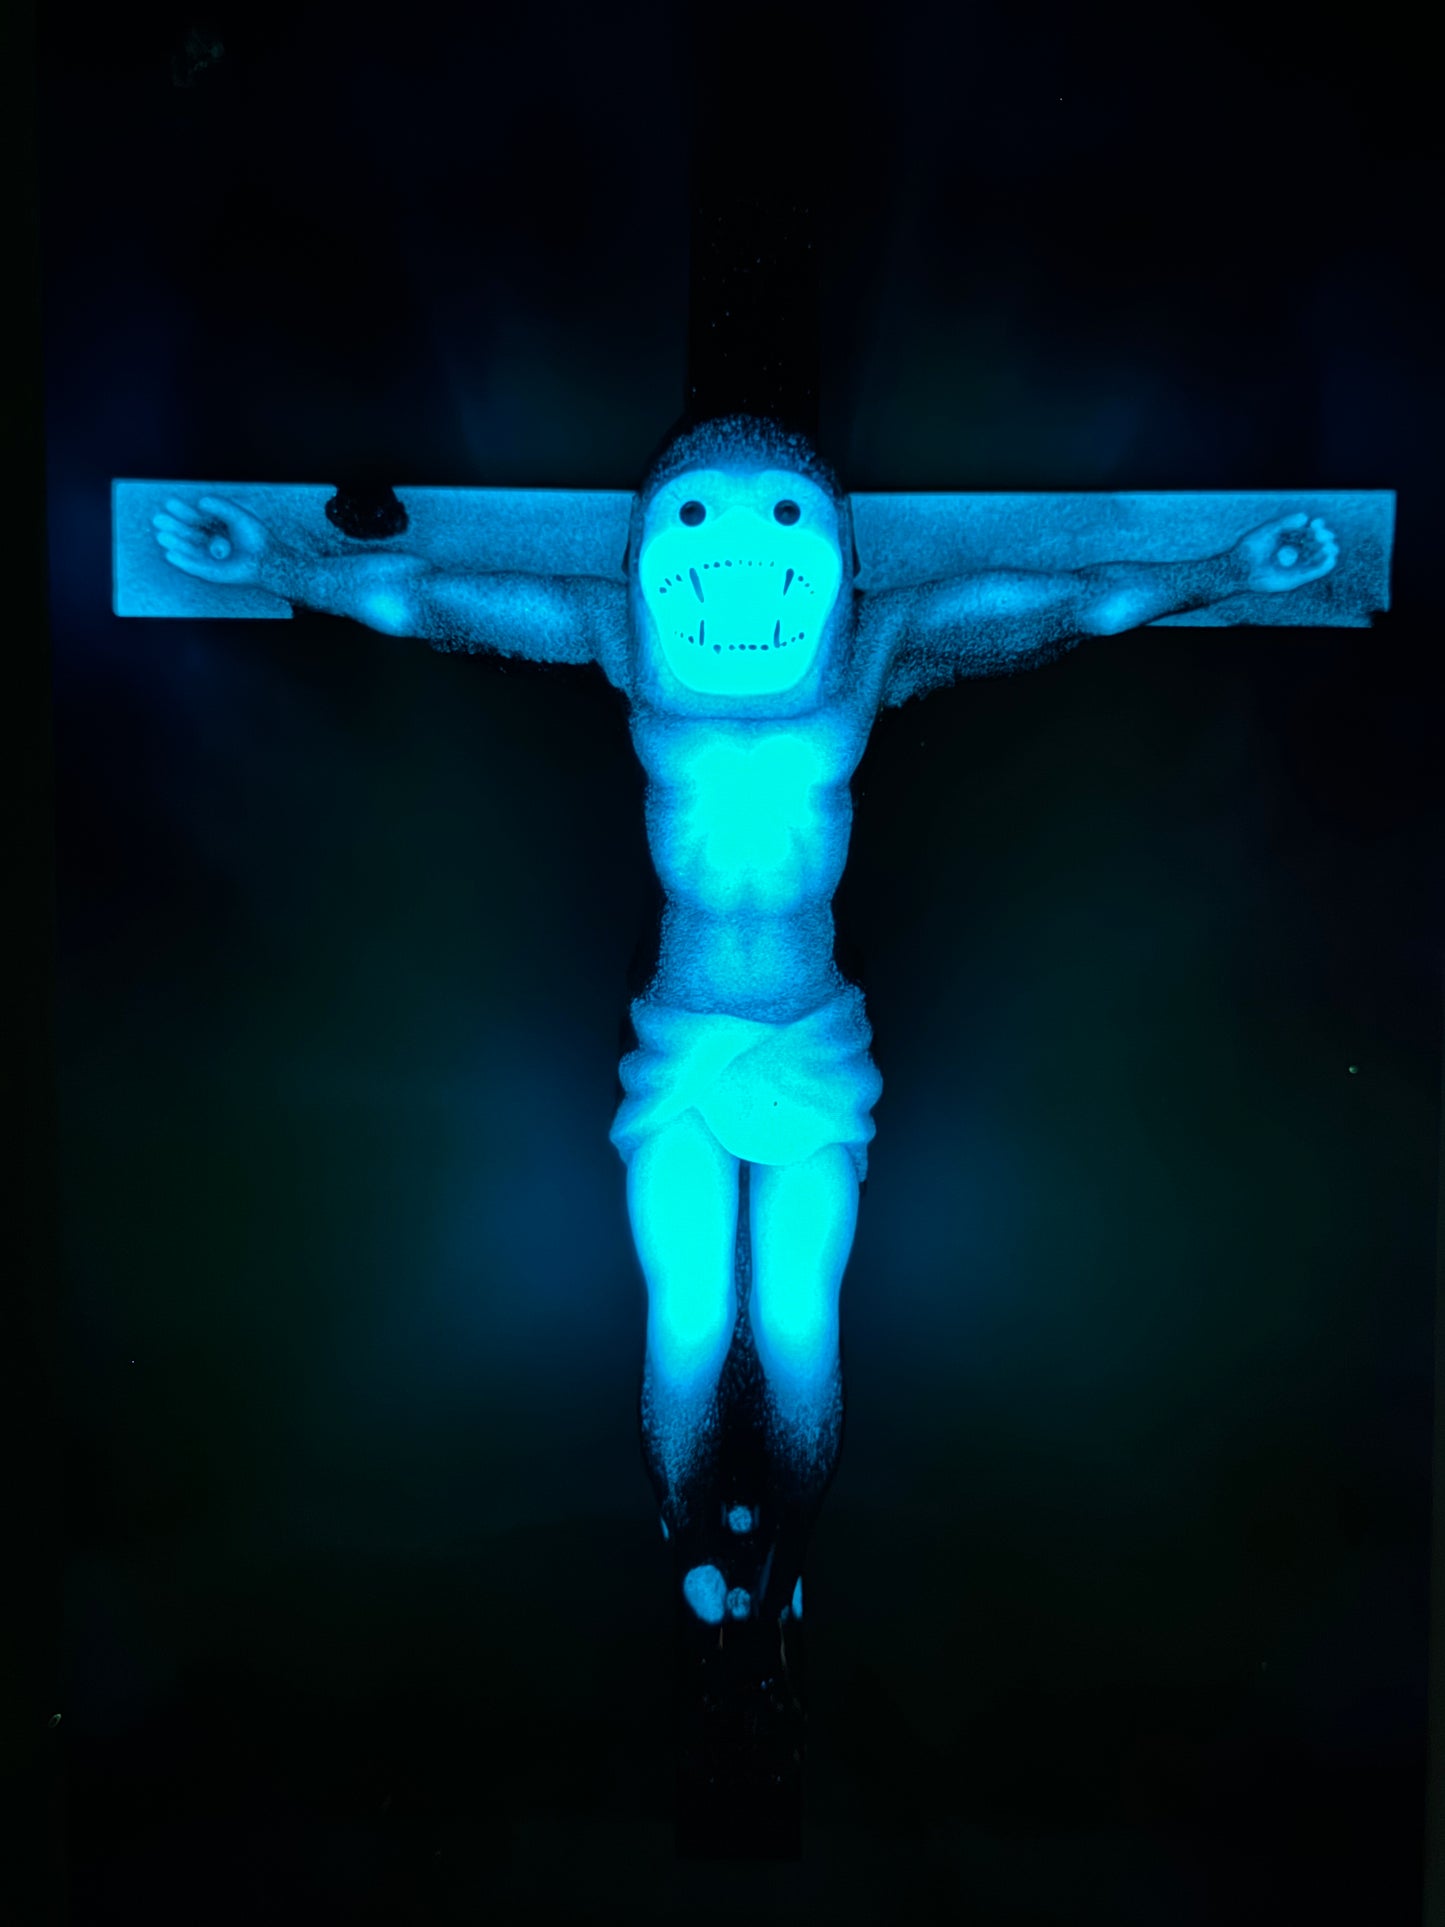 Christ on the Cross but he is an Ape, Magical Toy: Dark Days